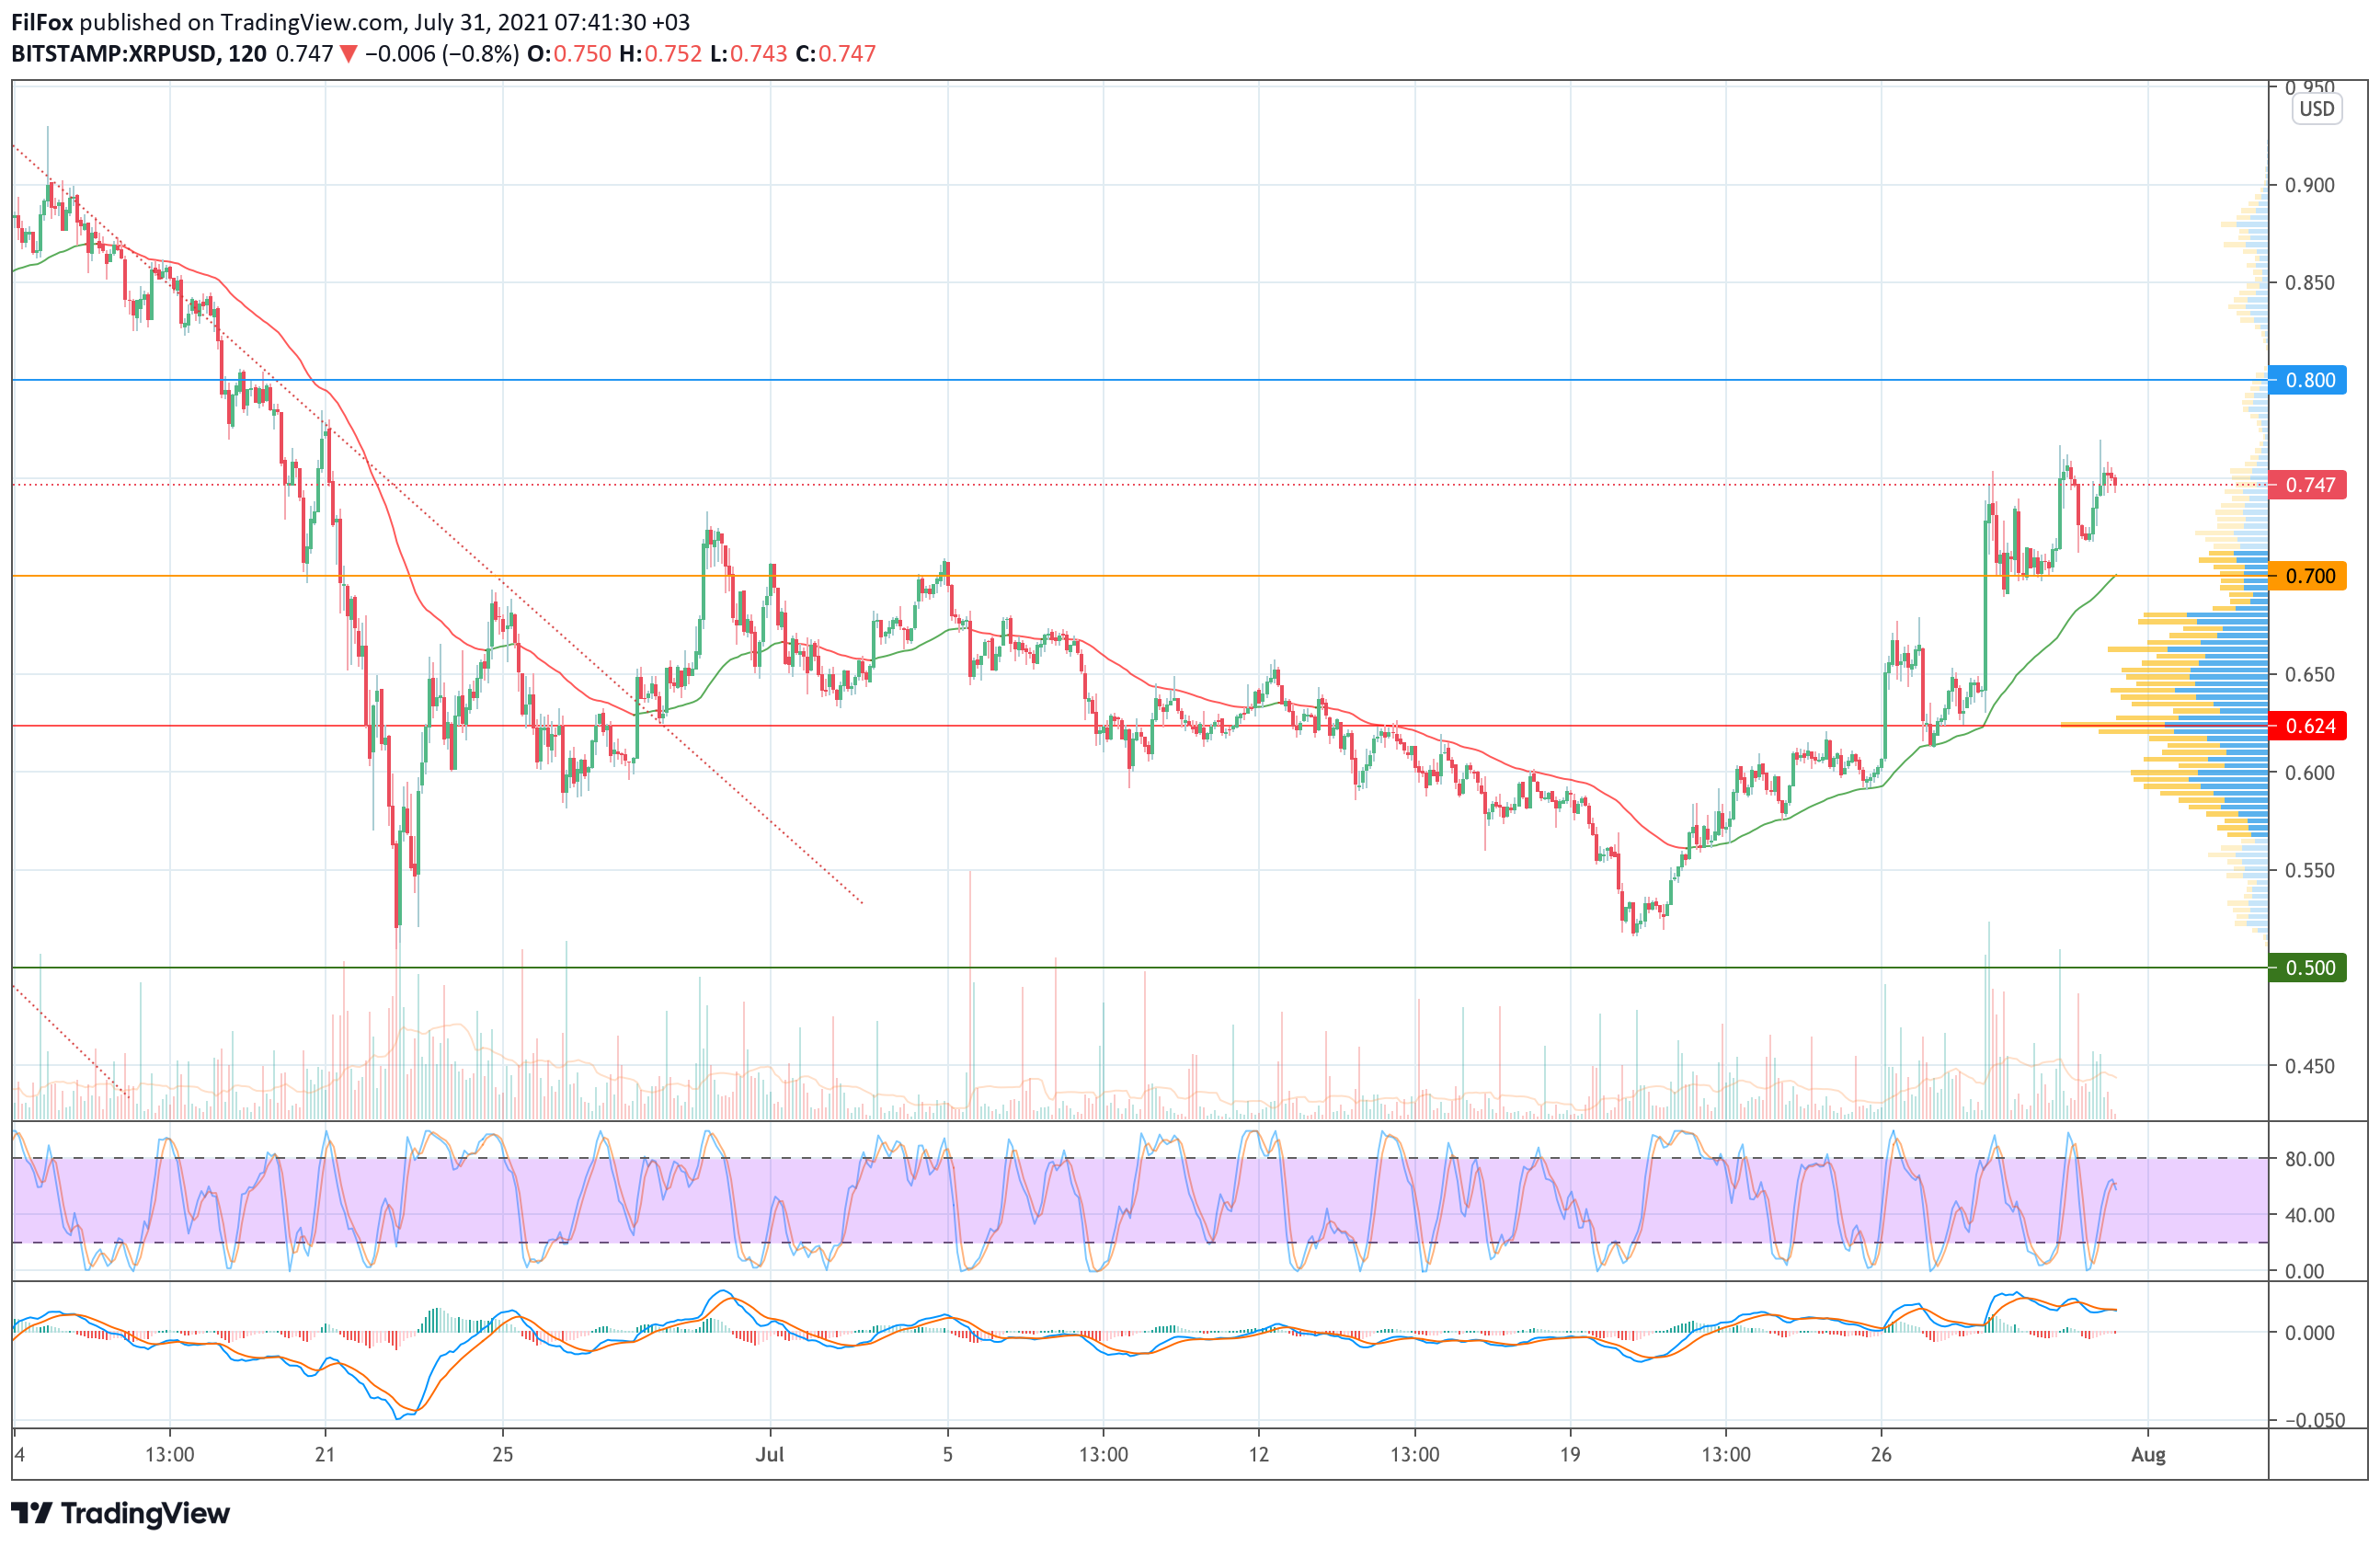 Analysis of the prices of Bitcoin, Ethereum, XRP for 07/31/2021